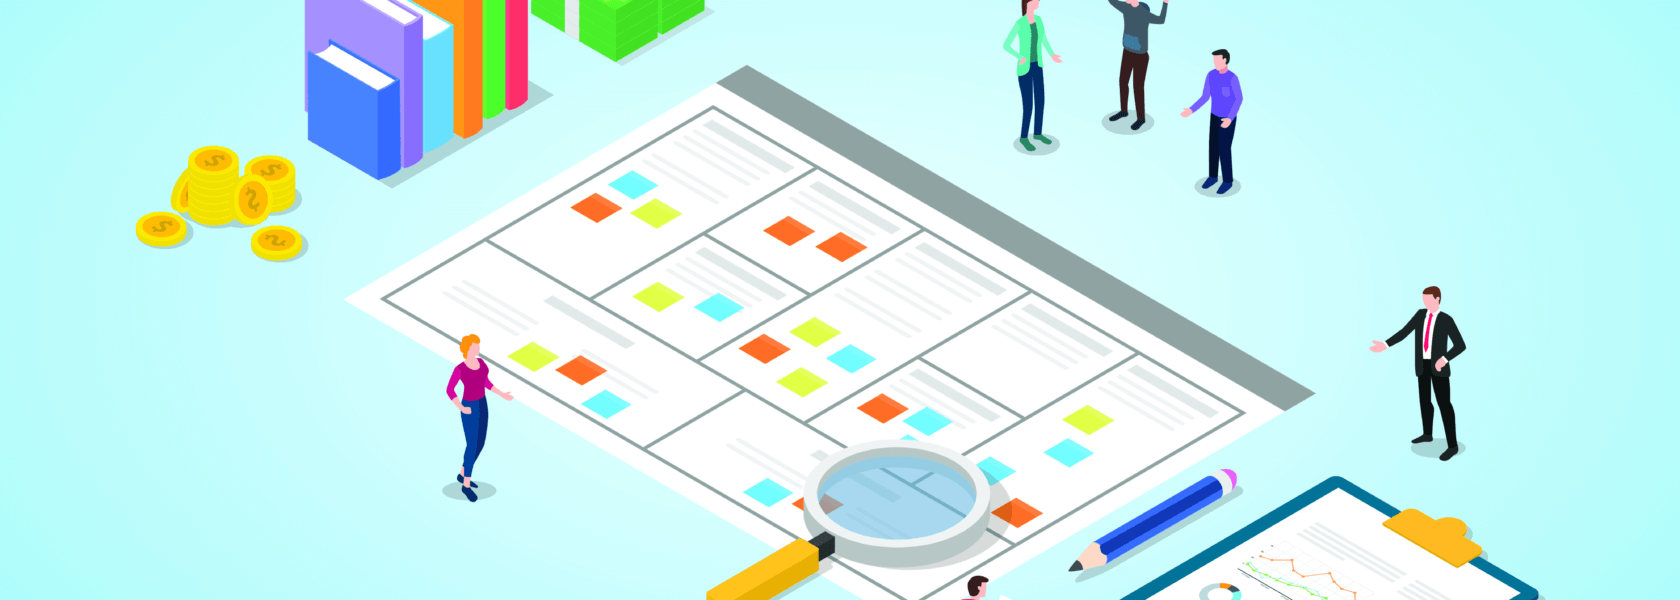 The Business Model Canvas: Startups DNA